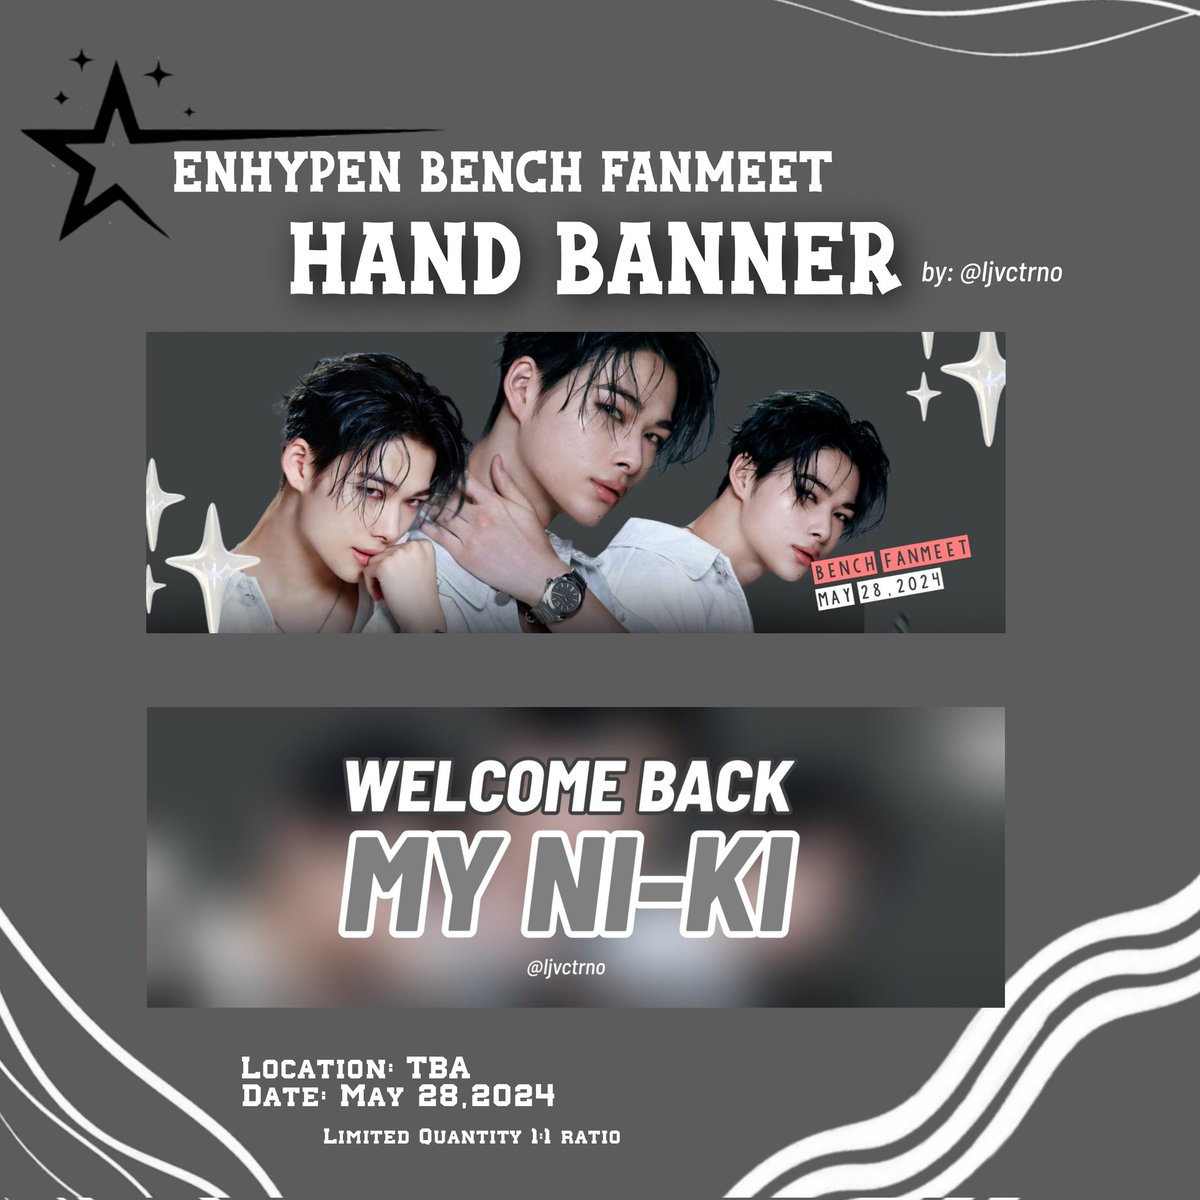 ♡ENHYPEN HAND BANNERS FREEBIES ♡
#BENCHandENHYPEN

🦋 show me this tweet to claim
• mbf, like and rt
~ strictly 1:1 ratio 
~  limited qty only

see you there, engenes ~_~